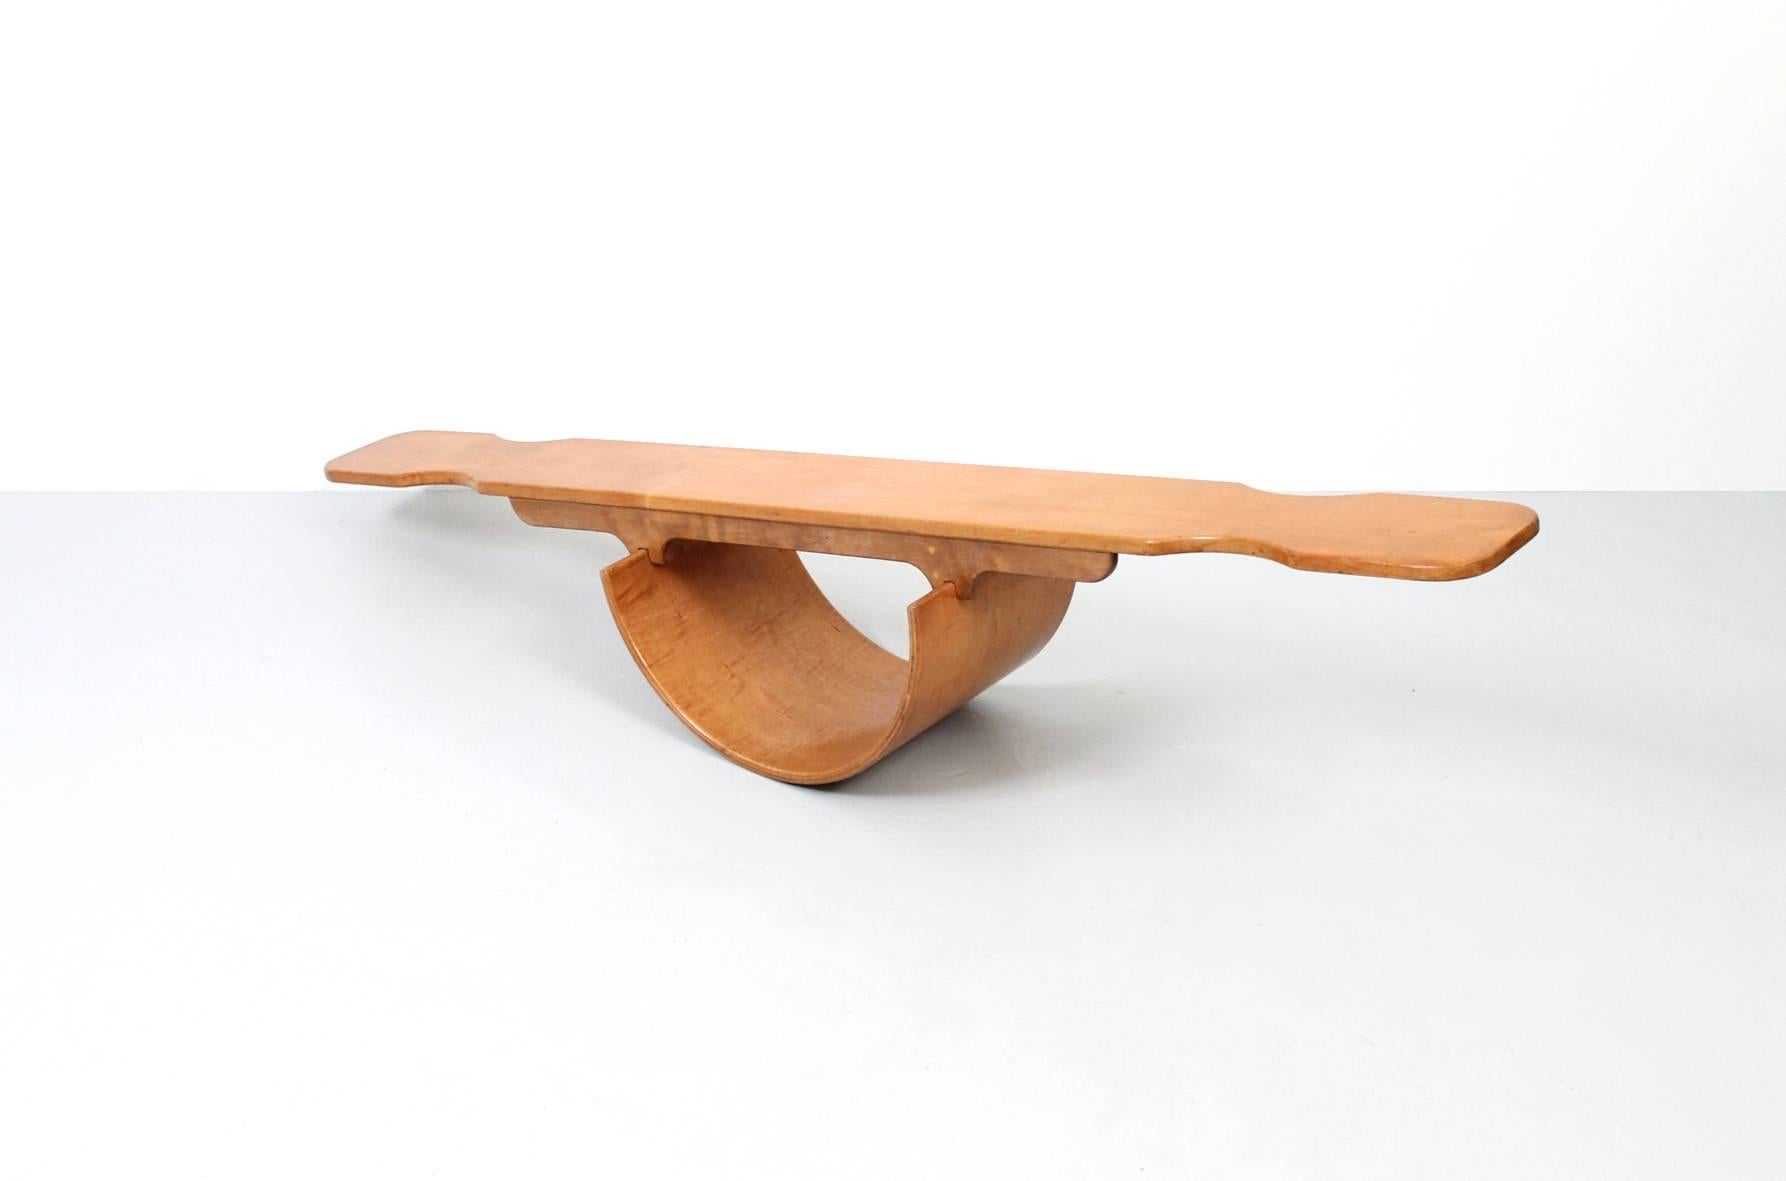 American Modernist Child's Plywood Seesaw